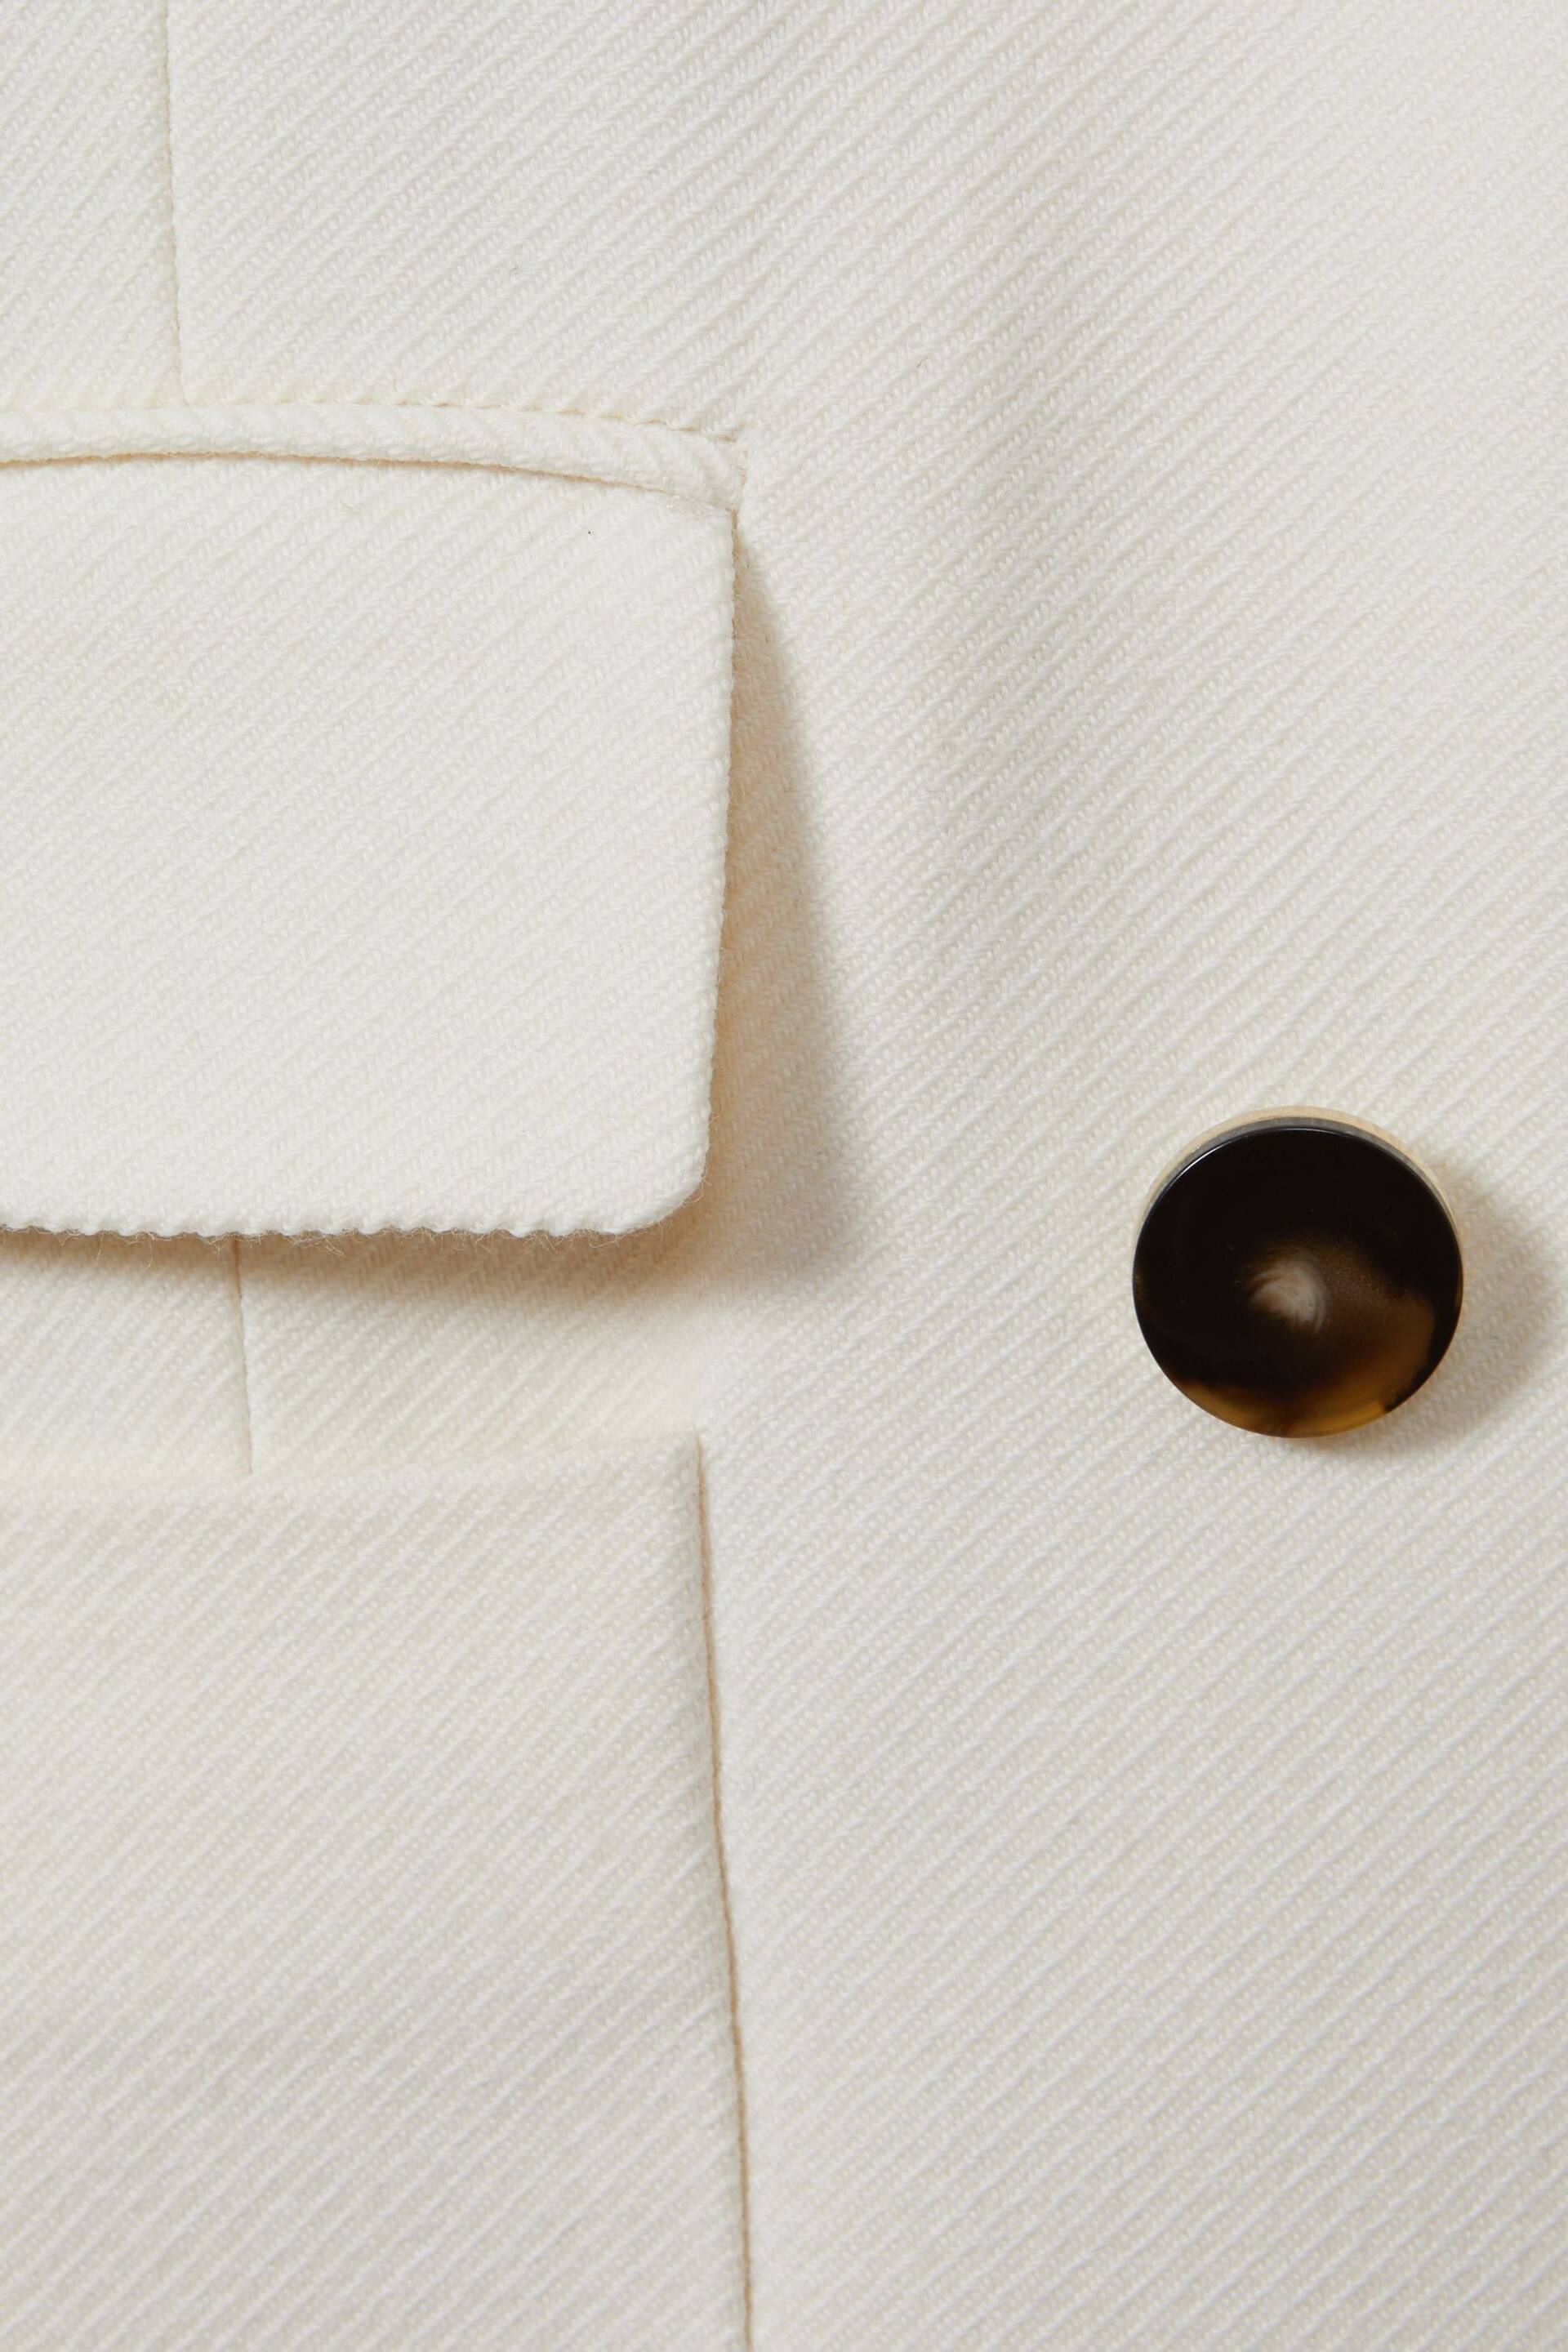 Reiss White Larsson Double Breasted Twill Blazer - Image 6 of 6